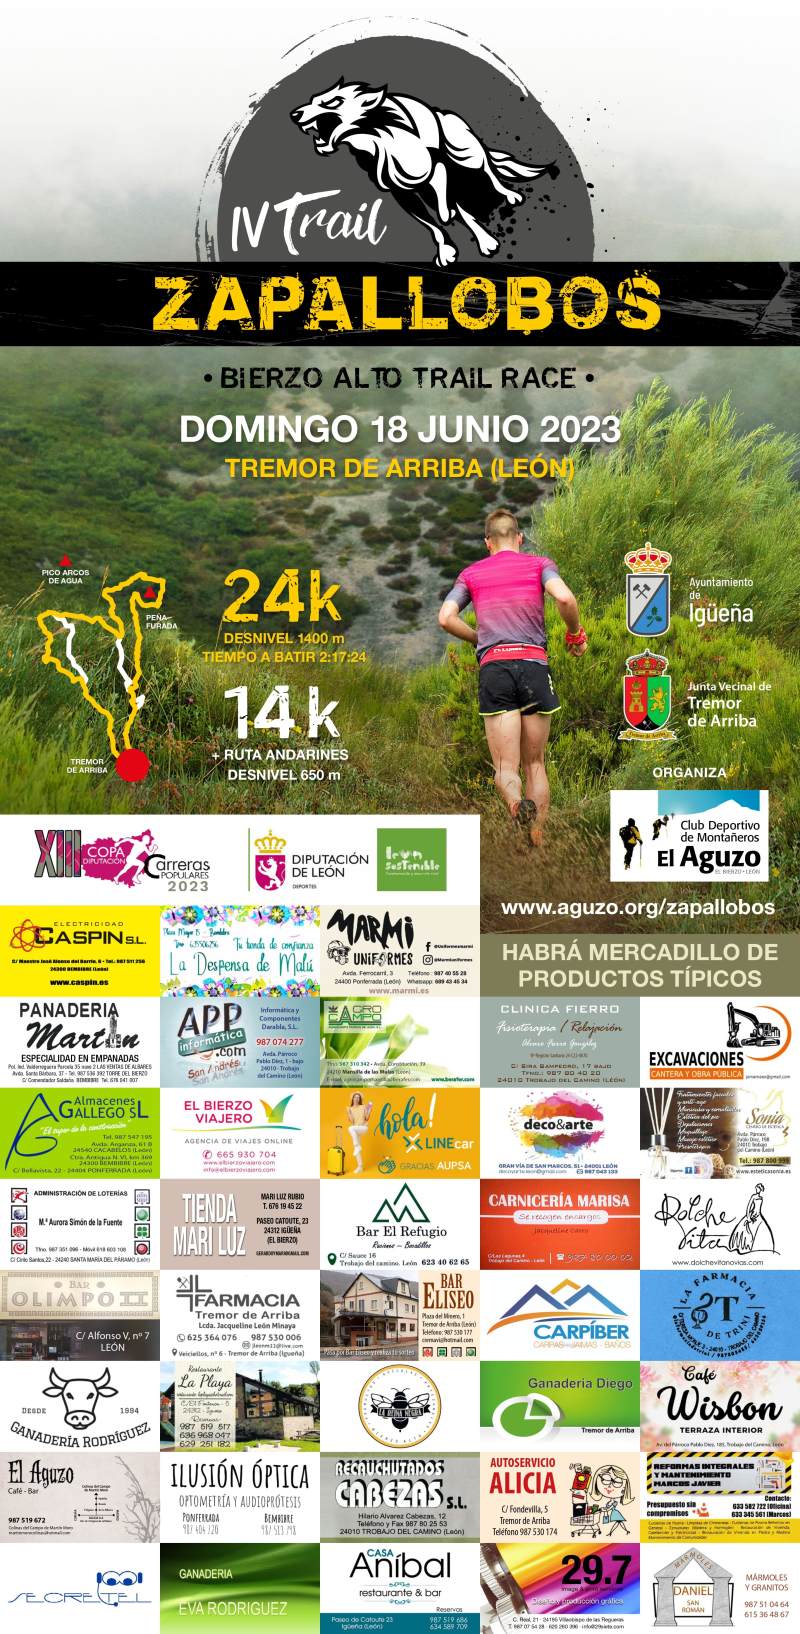 Event Poster IV TRAIL ZAPALLOBOS